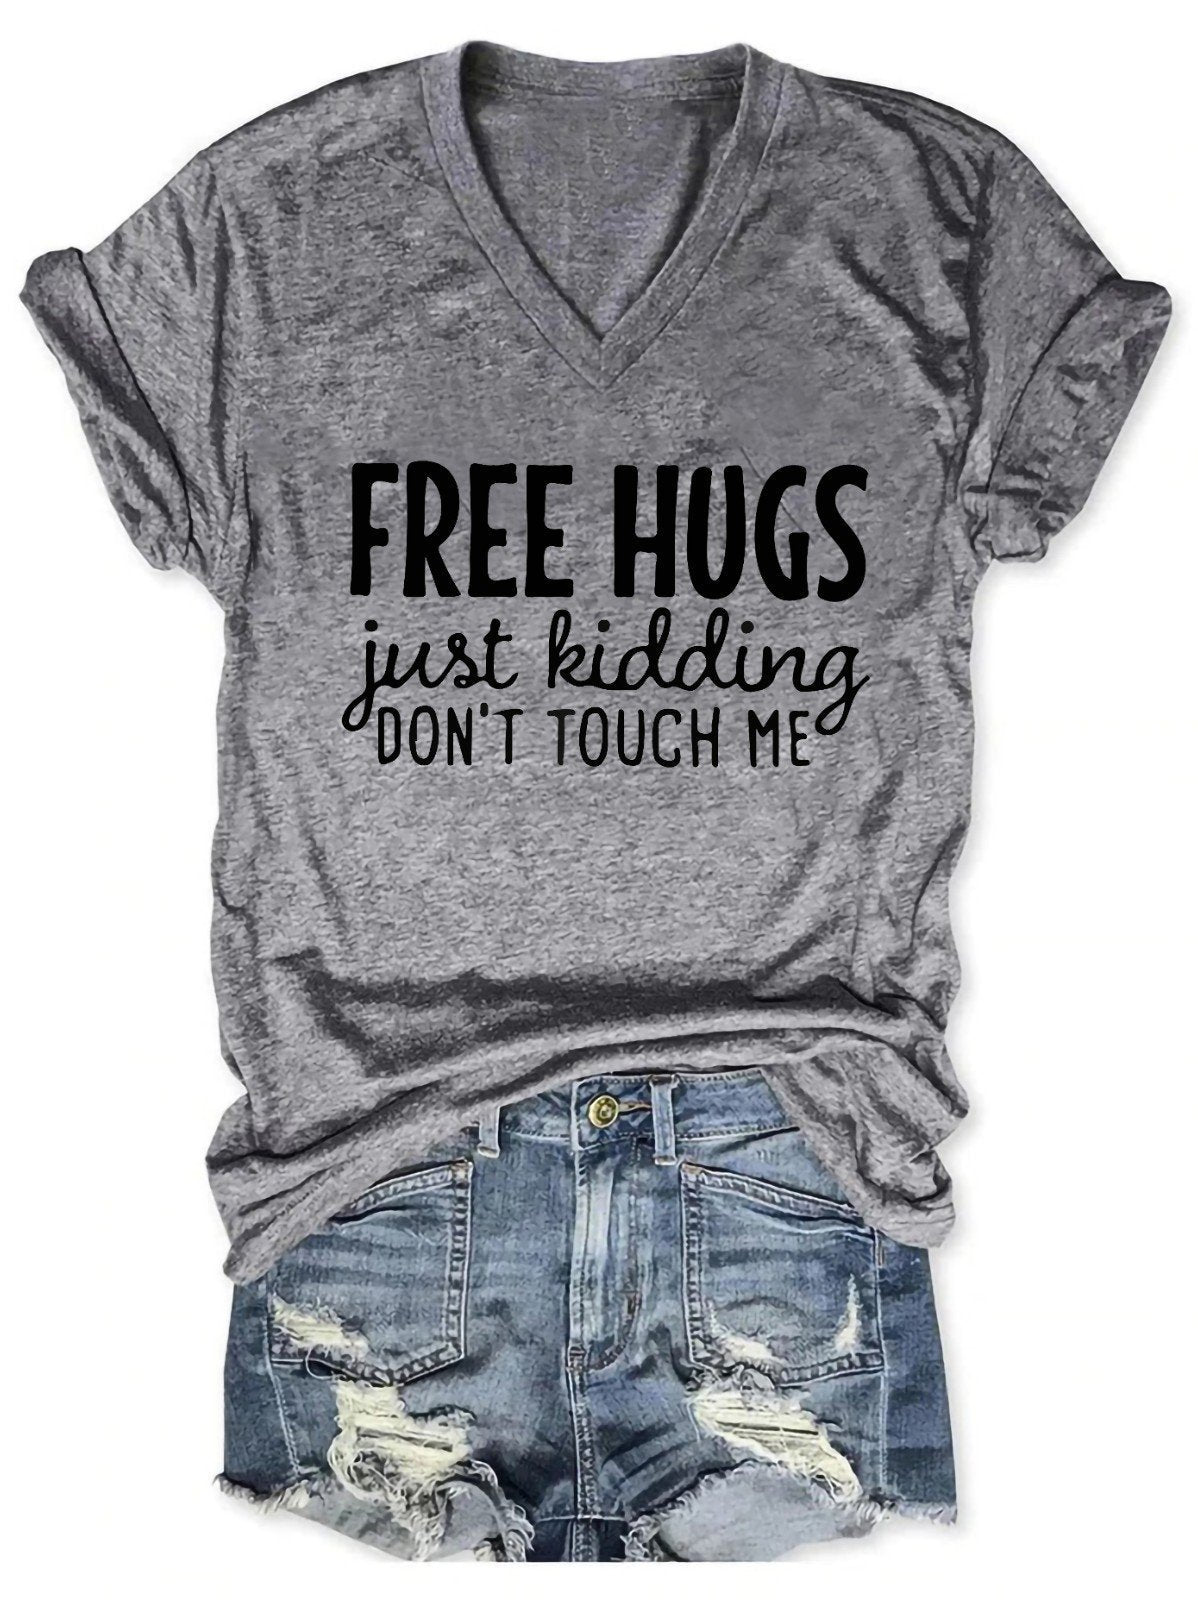 Free Hugs Just Kidding Don't Touch Me Women's V-Neck T-Shirt - Outlets Forever